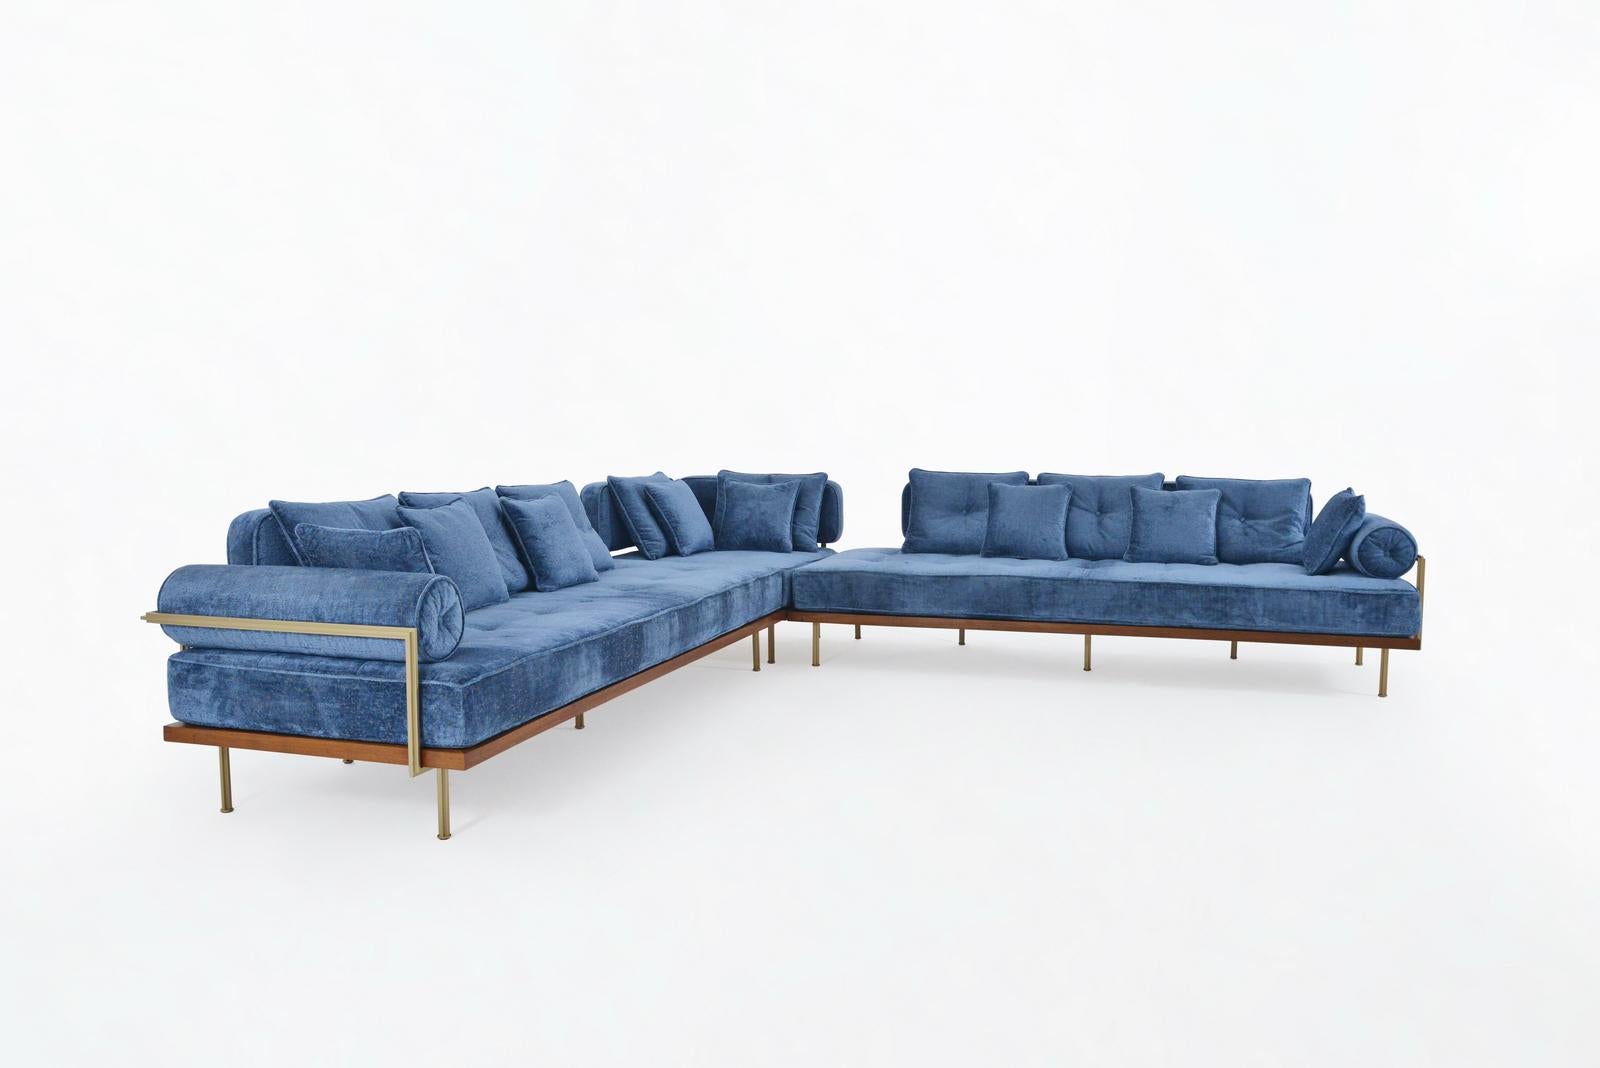 Mid-Century Modern Bespoke Corner Sofa with Brass and Reclaimed Hardwood Frame by P.Tendercool For Sale